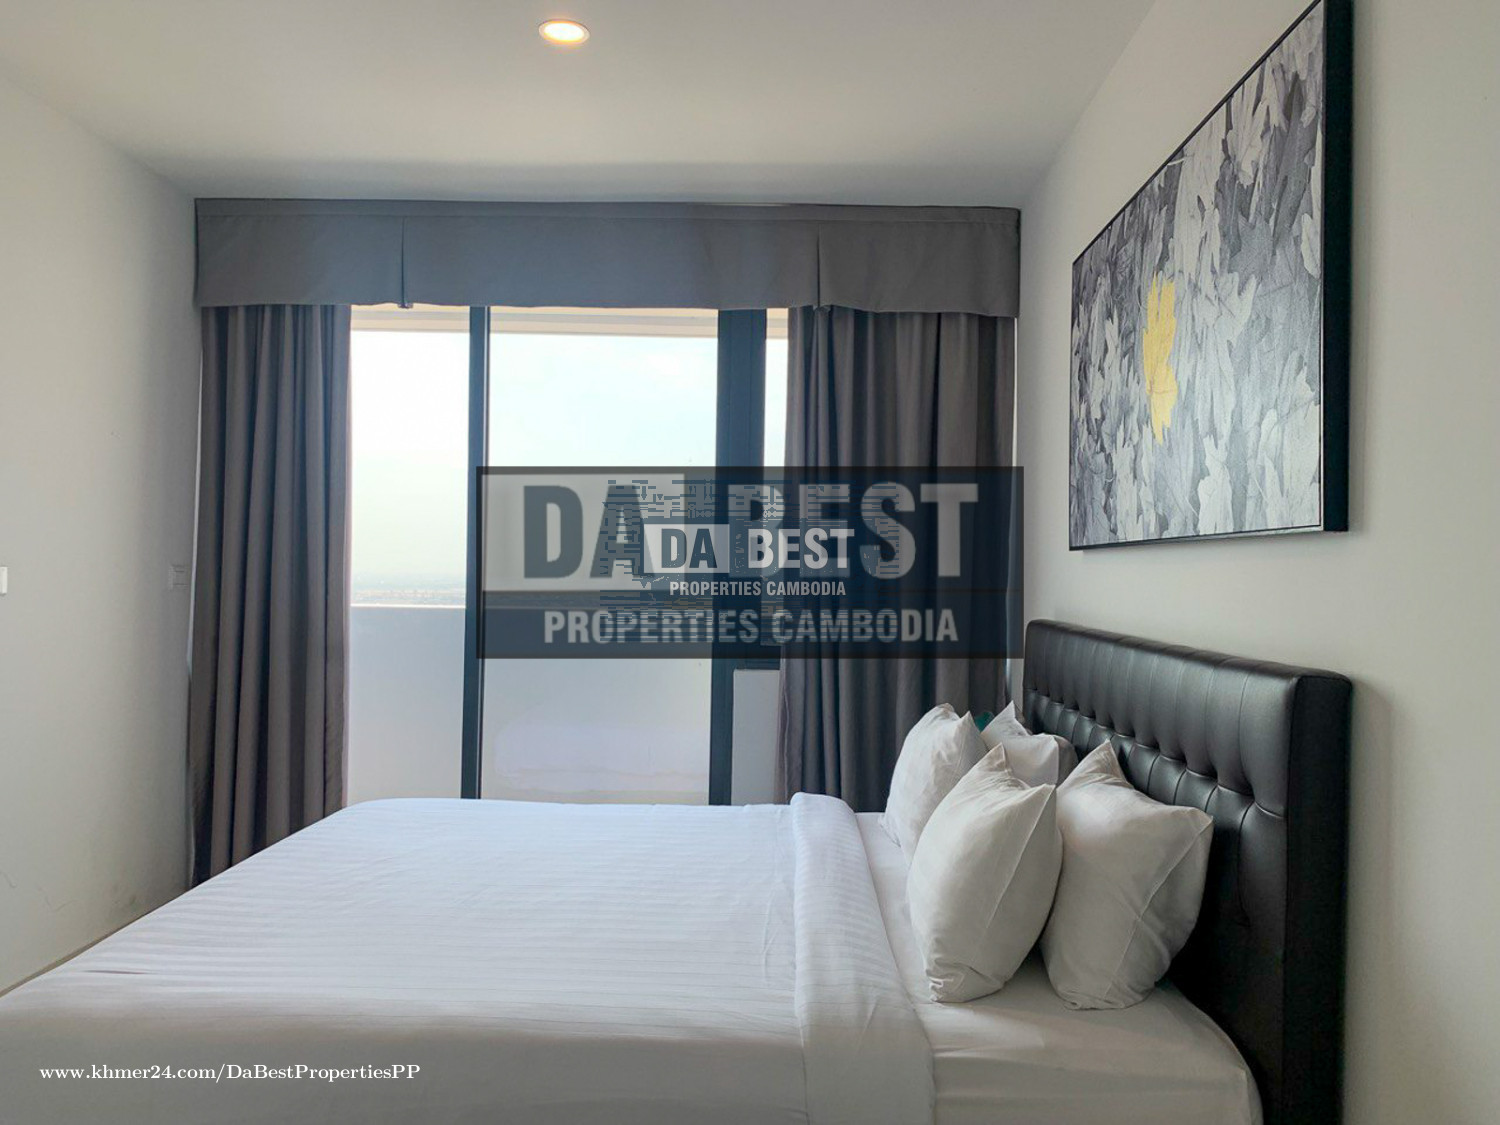 DABEST PROPERTIES: 1 Bedroom Apartment for Rent with Gym, Swimming pool in Phnom Penh